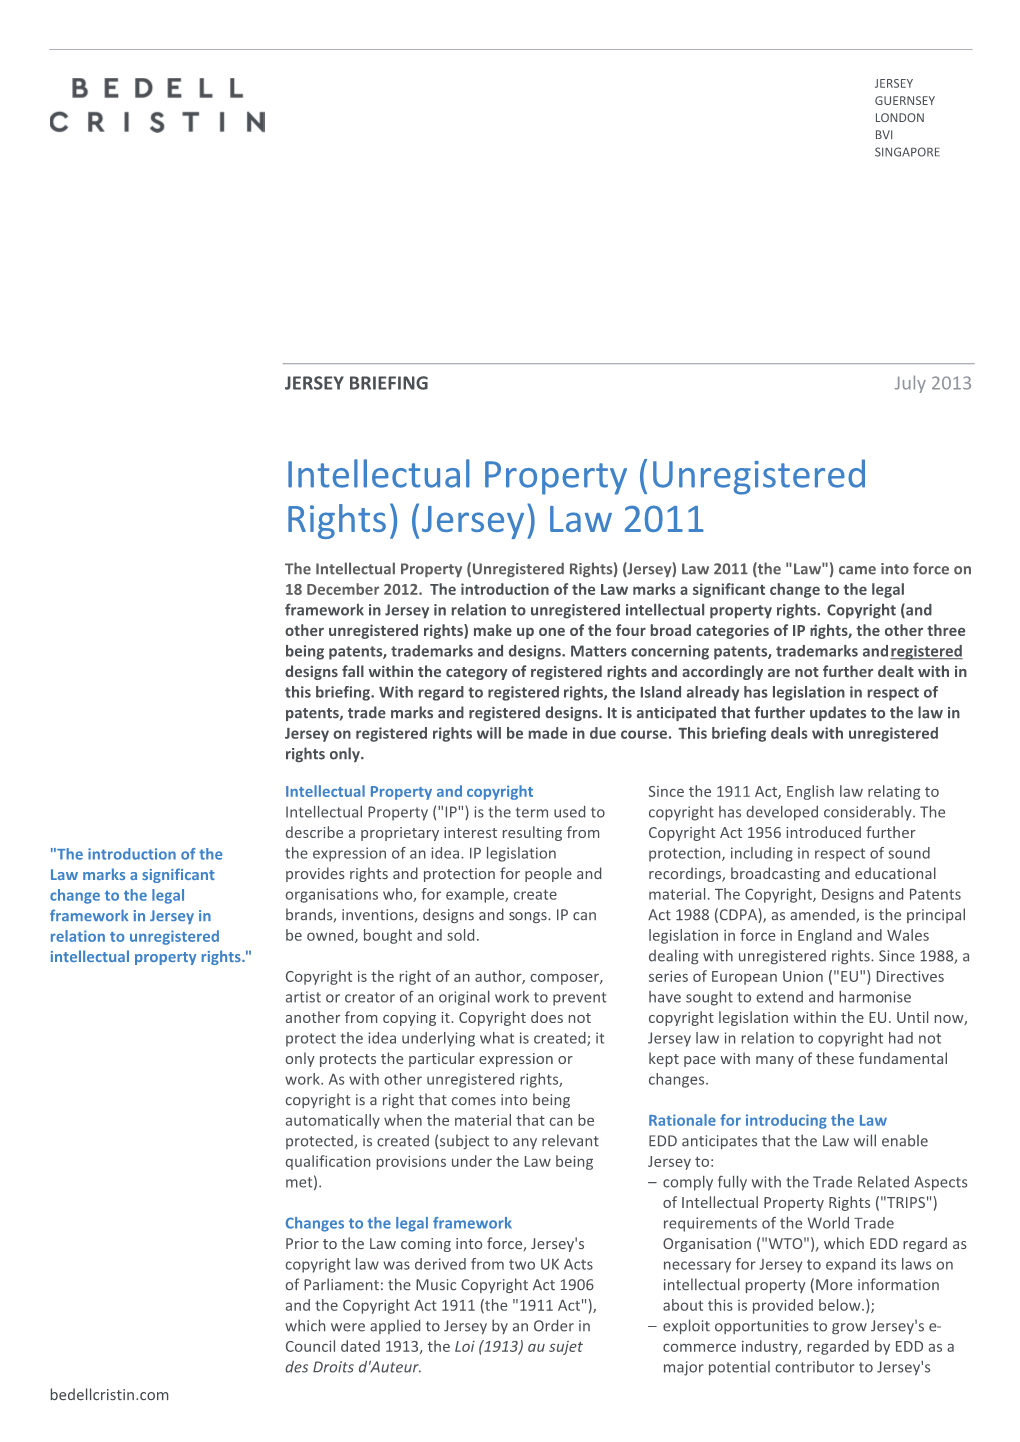 Intellectual Property (Unregistered Rights) (Jersey) Law 2011